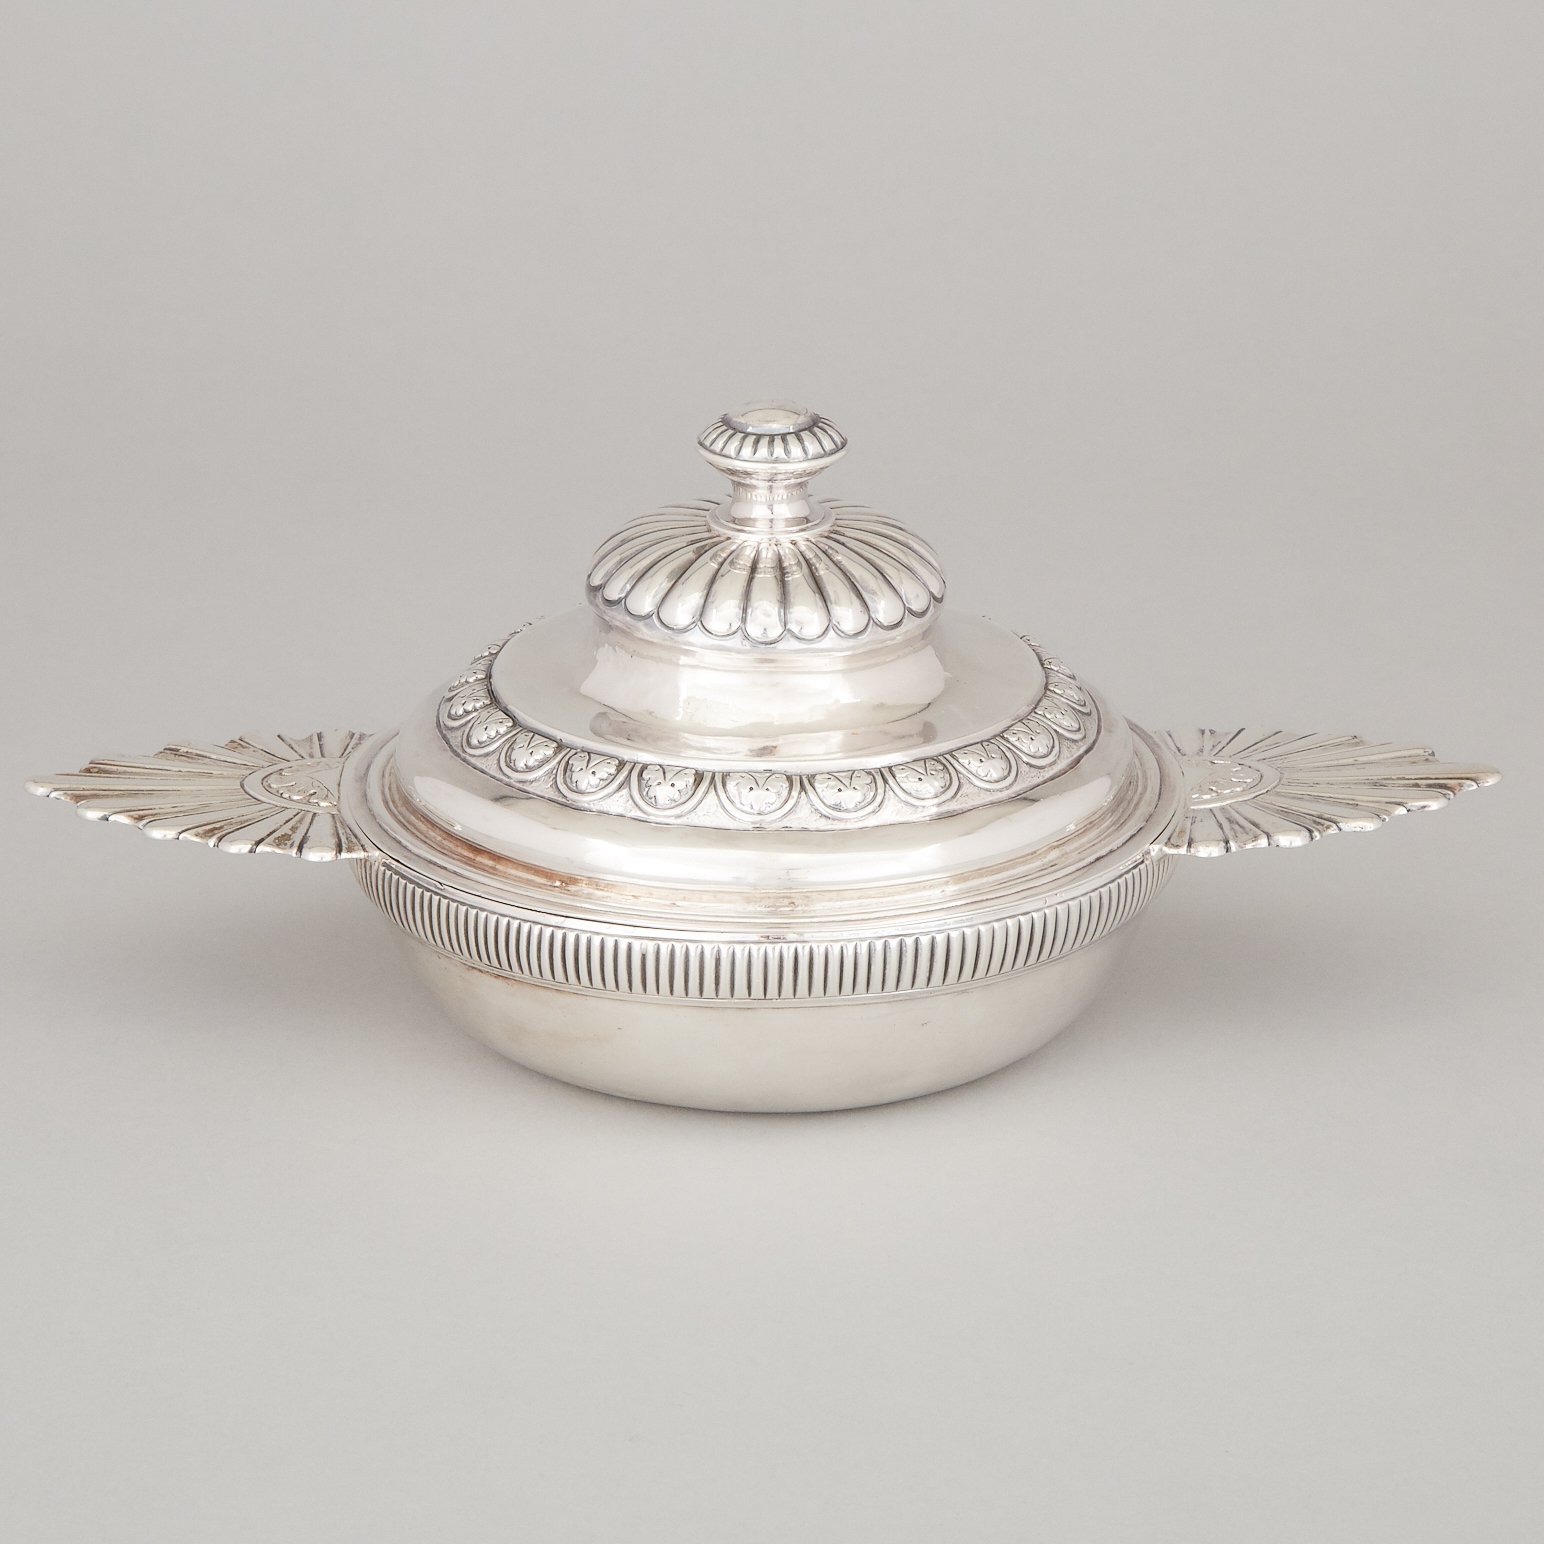 Canadian Silver Covered Ecuelle, Salomon Marion, Montreal, Que., early 19th century